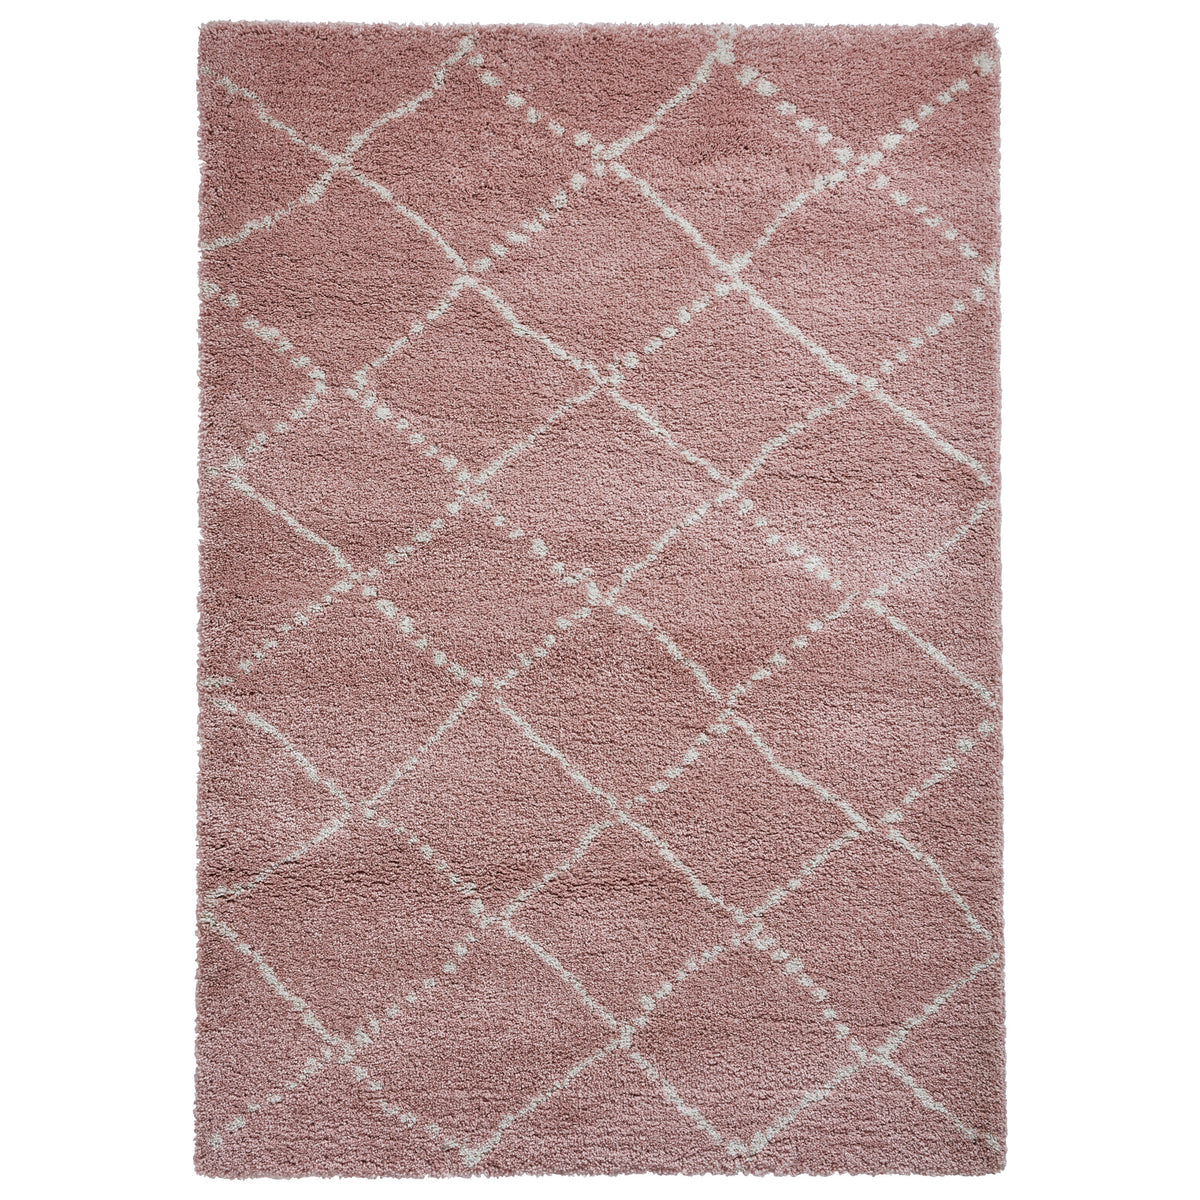 Webster Rose Pink Diamond Two Toned Rug from Roseland Furniture